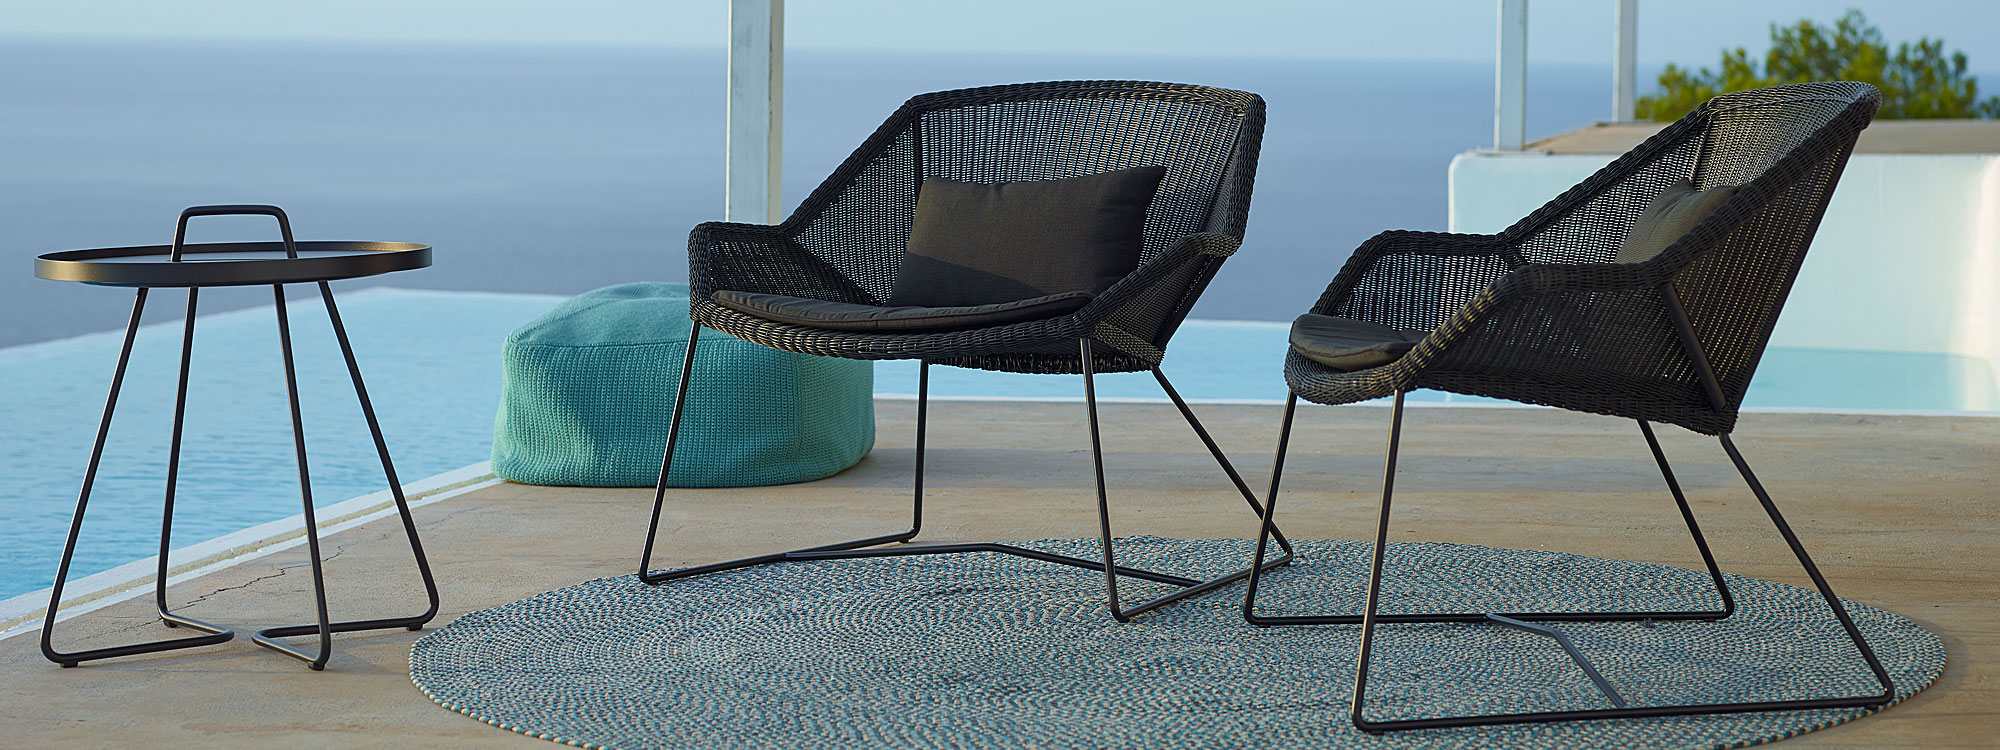 Image of pair of Cane-line Breeze black woven garden lounge chairs with turquoise Divine garden pouf and black On The Move side table